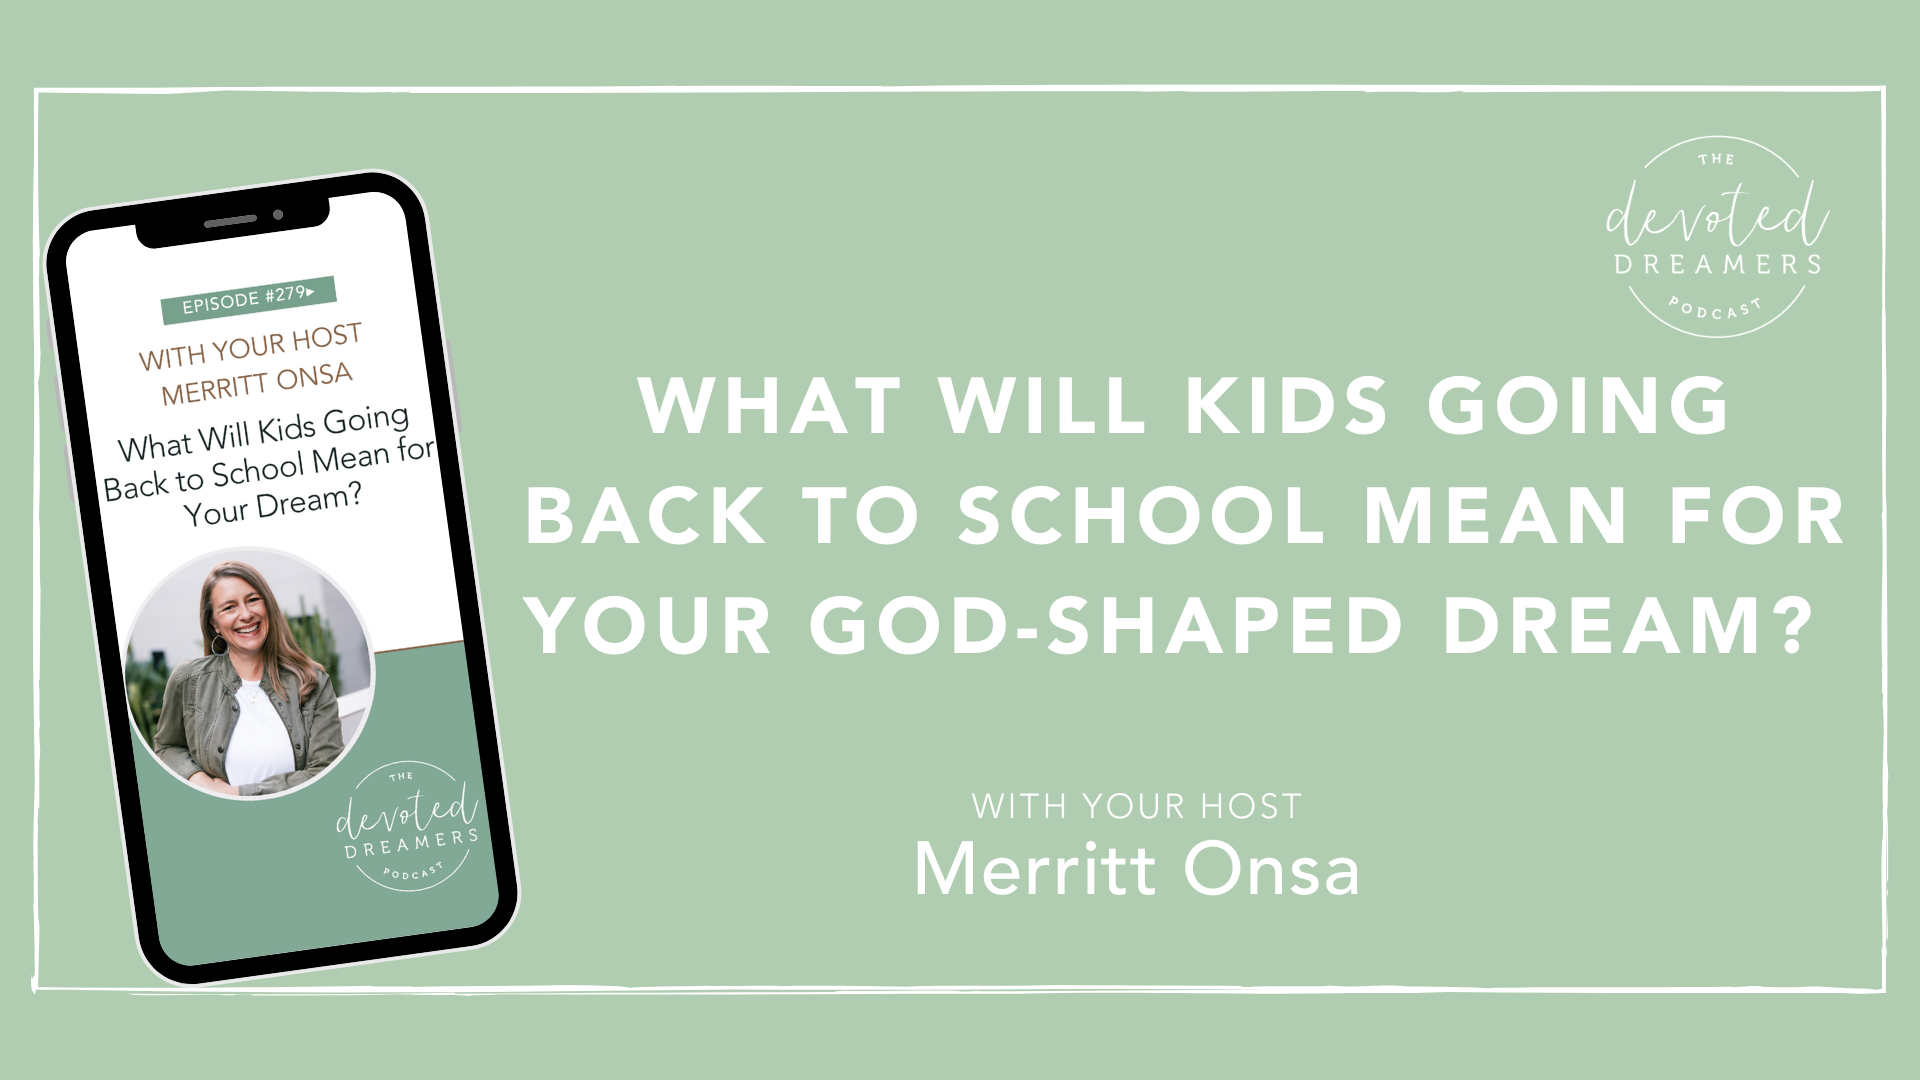 What Will Kids Going Back to School Mean for Your God-Shaped Dream?